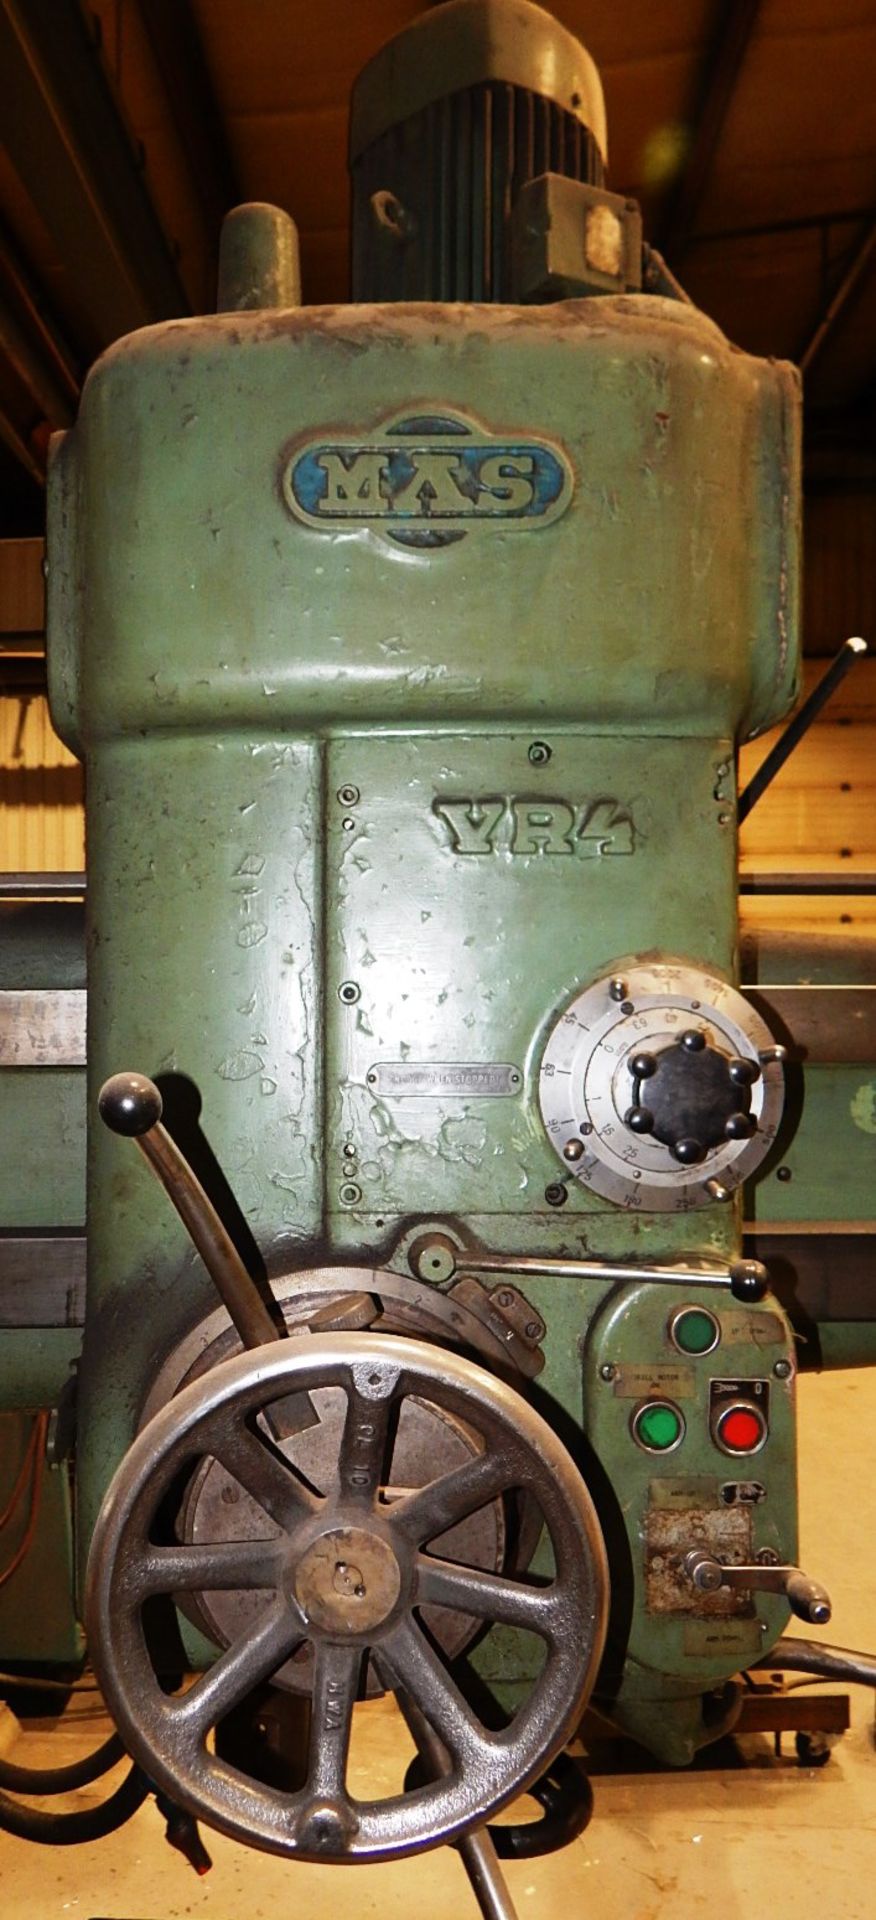 MAS VF4 5' RADIAL ARM DRILL WITH 12" COLUMN, SPEEDS TO 2000 RPM, COOLANT, S/N: 9795 (CI) [RIGGING - Image 3 of 6